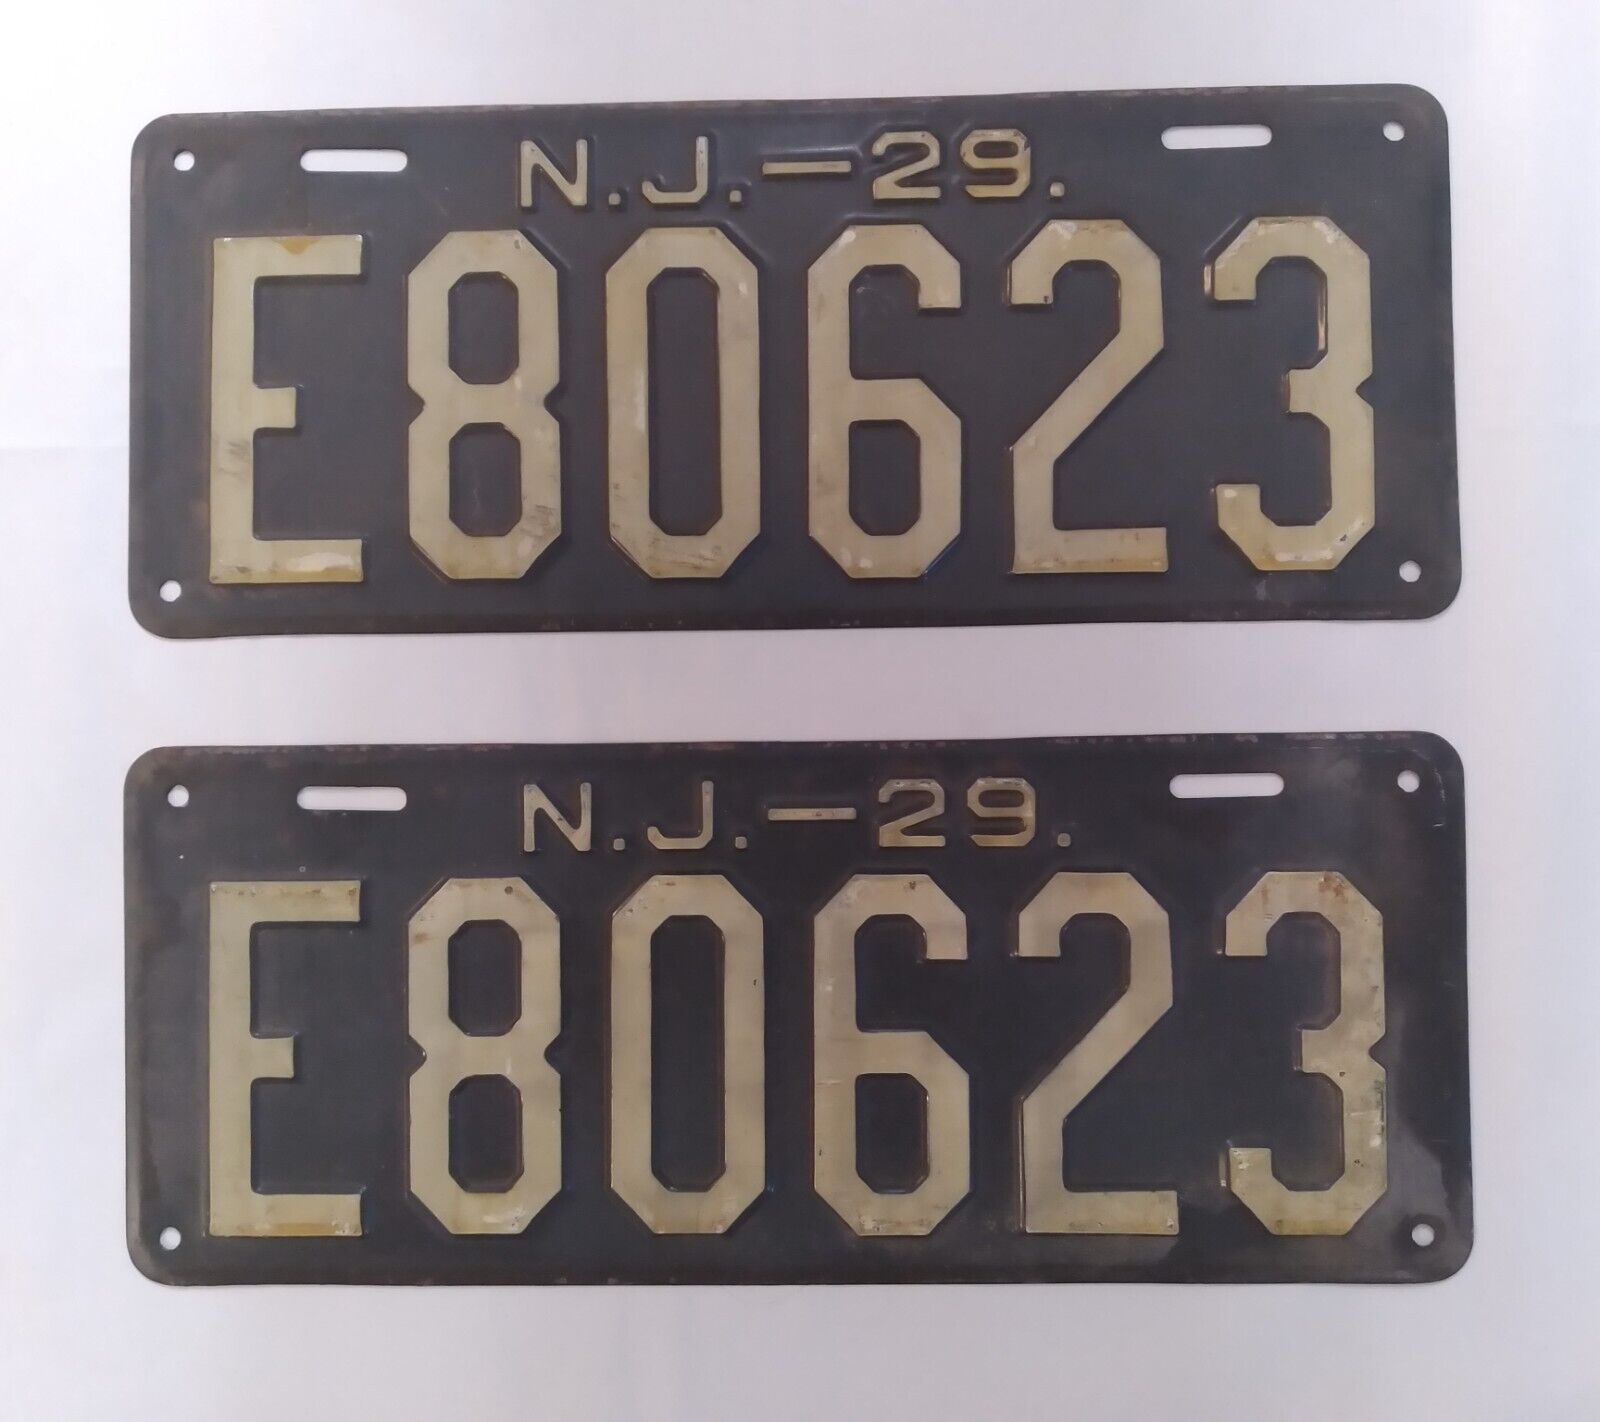 MATCHED PAIR of 1929 New Jersey license plates E80623 - \'29 NJ tags